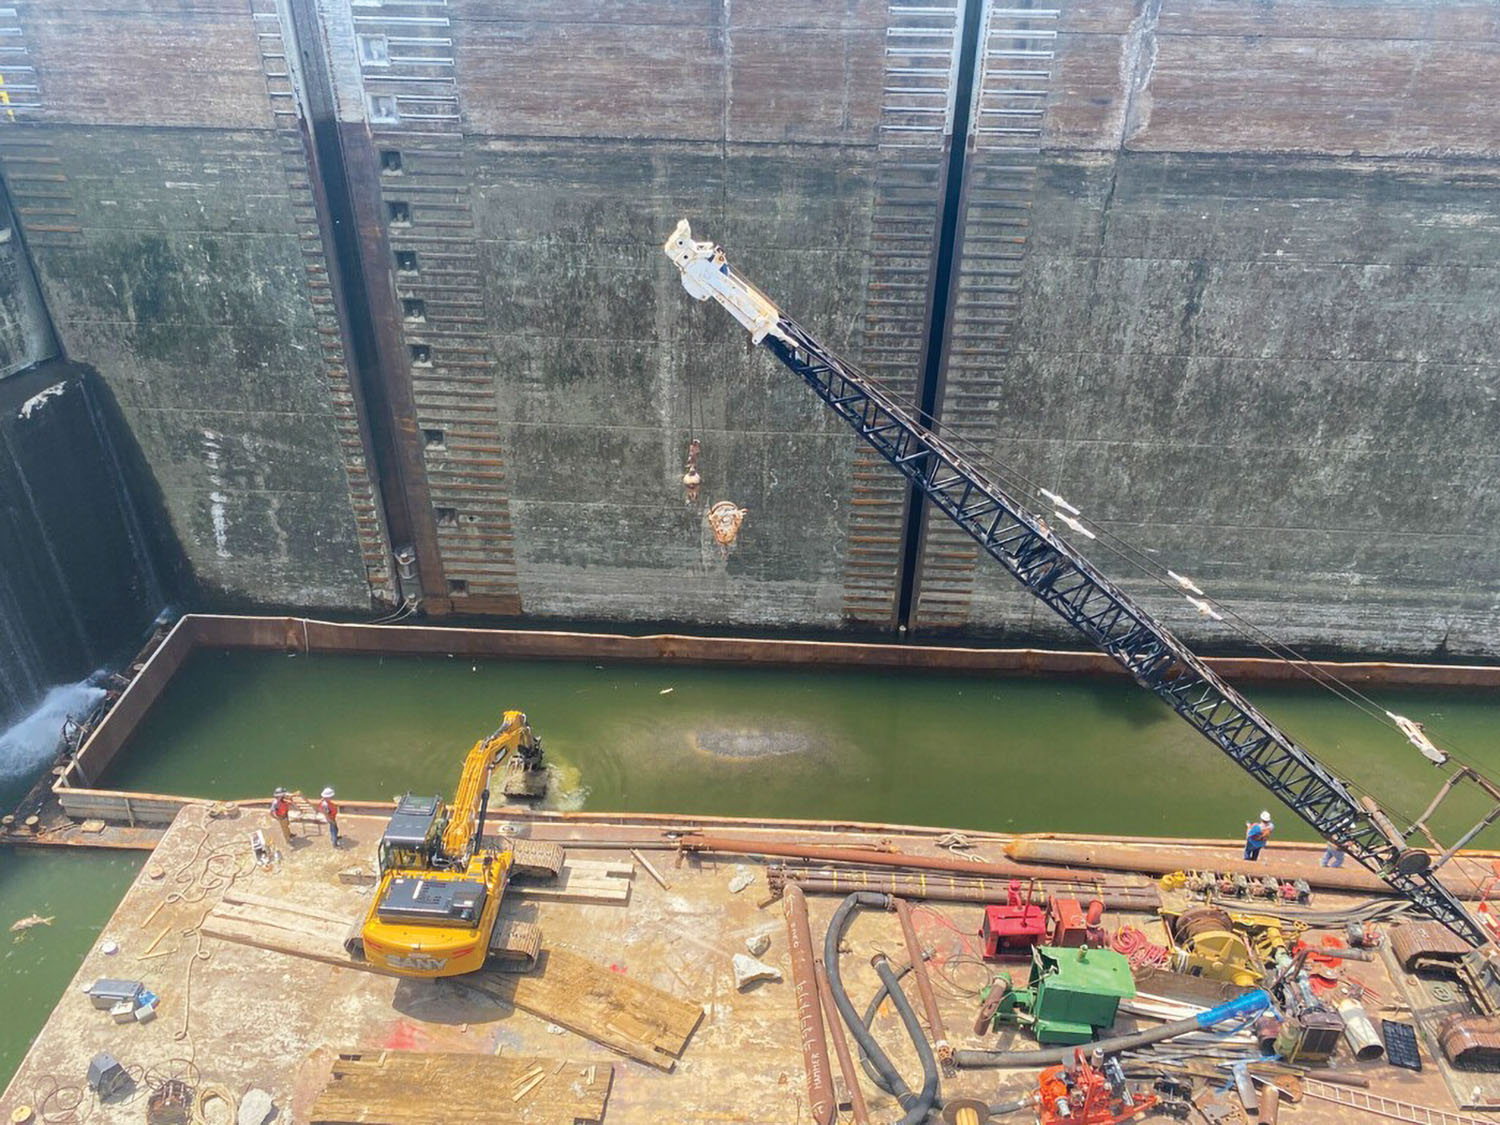 Crews work to lighter a barge loaded with rock that sank in Kentucky Lock. (Photo by Heather King, Nashville Engineer District)